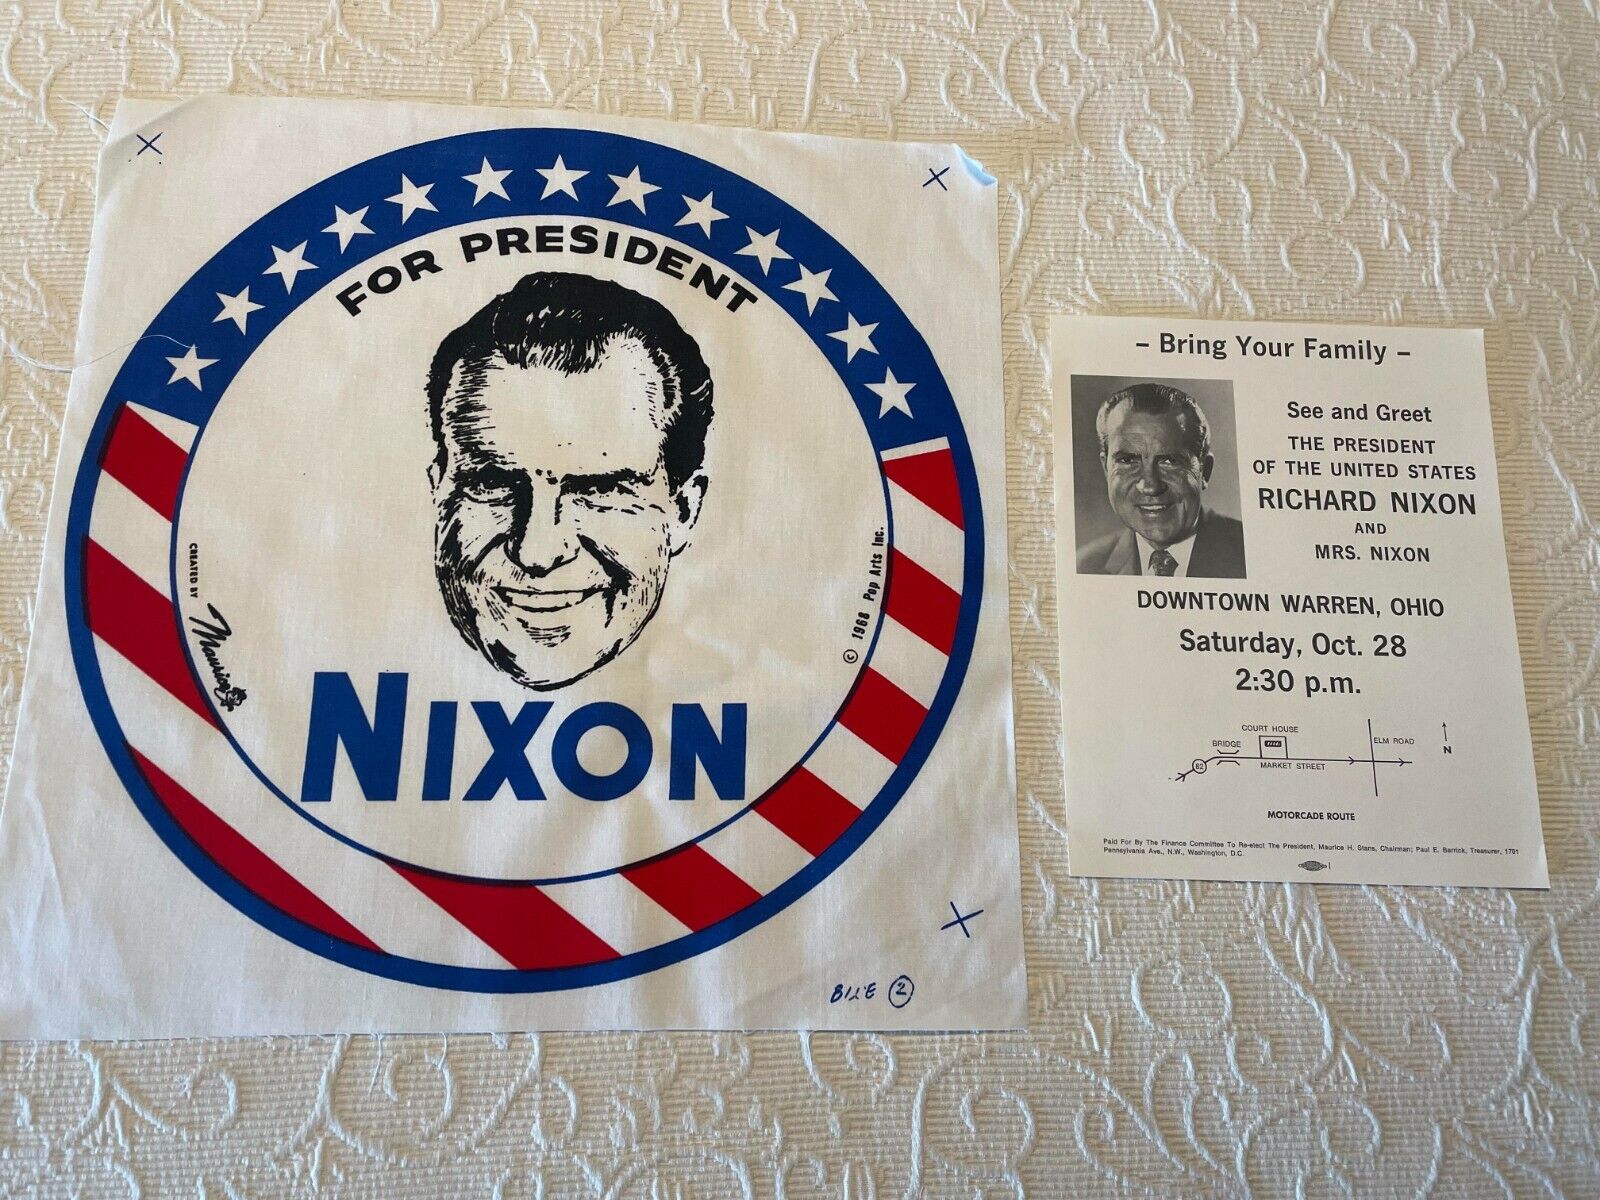 1968 and 1972 RICHARD NIXON campaign items: large fabric square, rally broadside